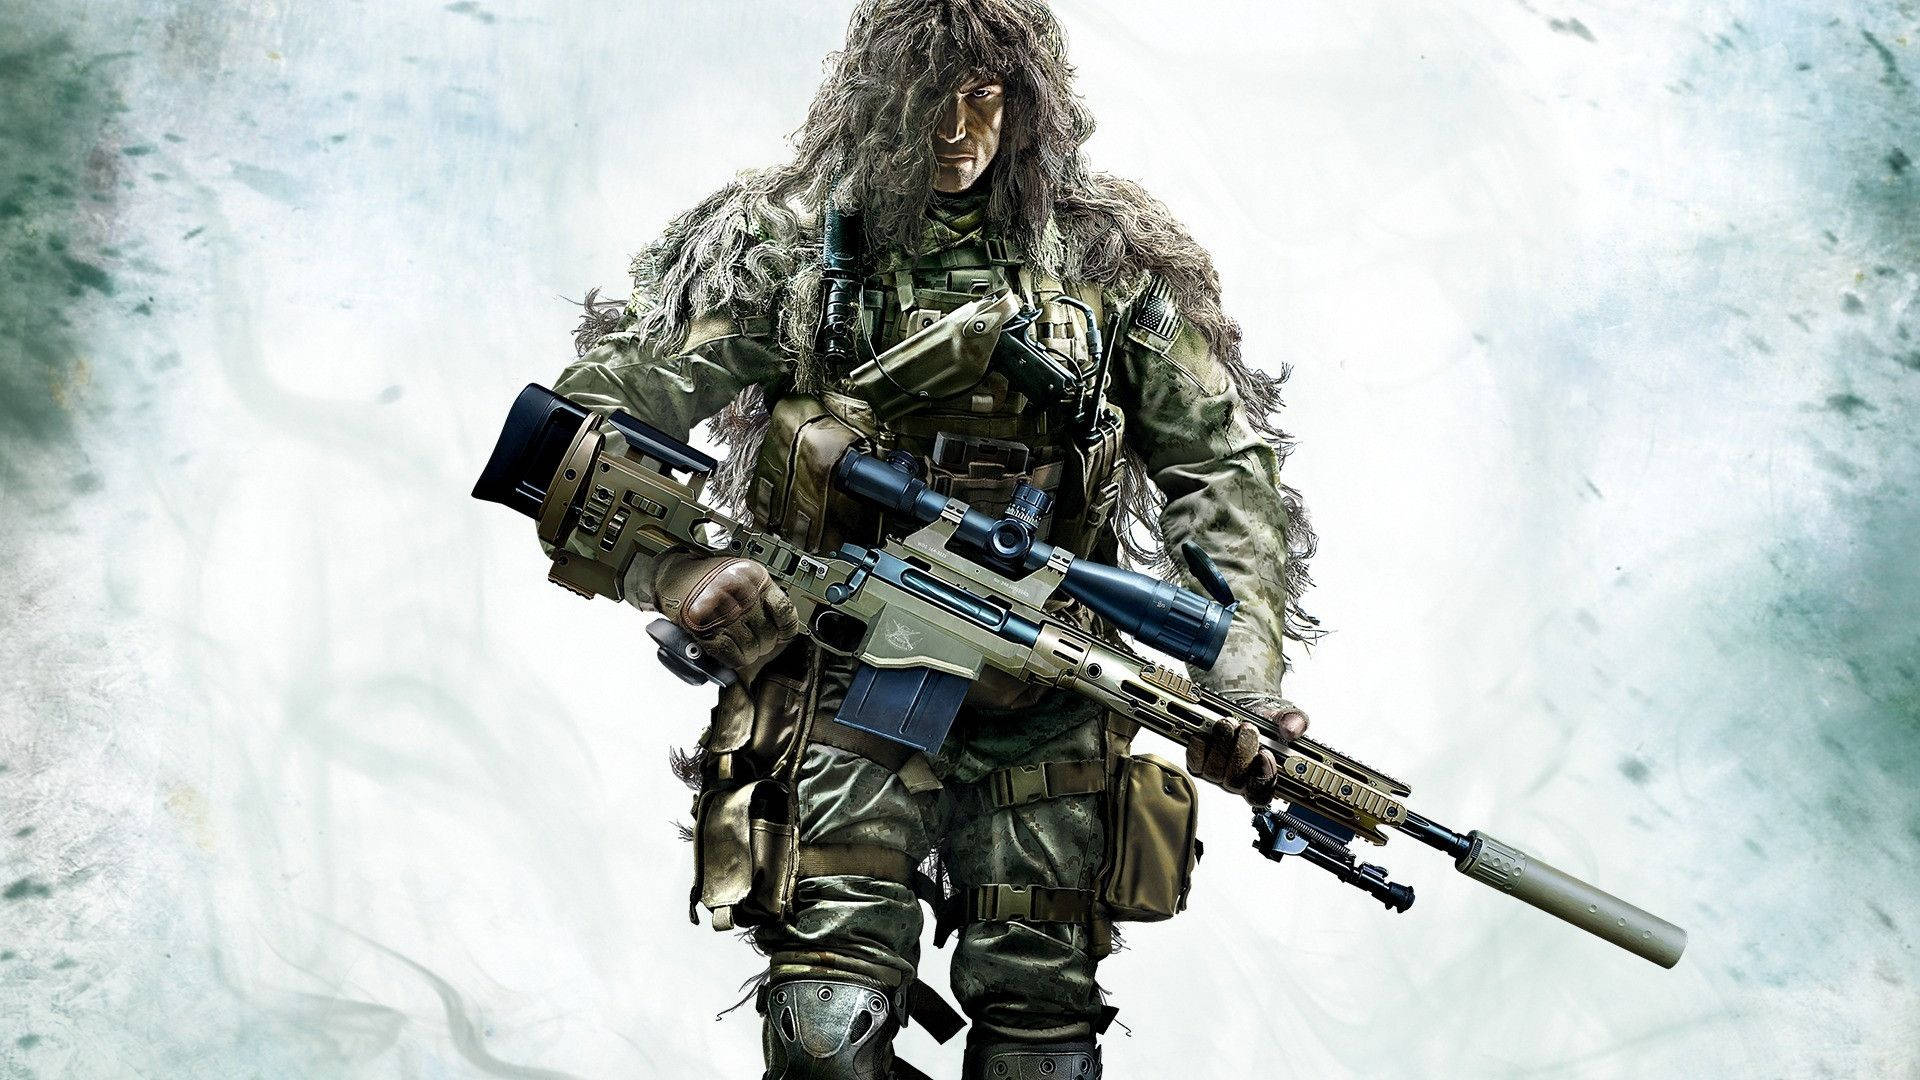 Camouflaged Sniper Soldier in Action Wallpaper